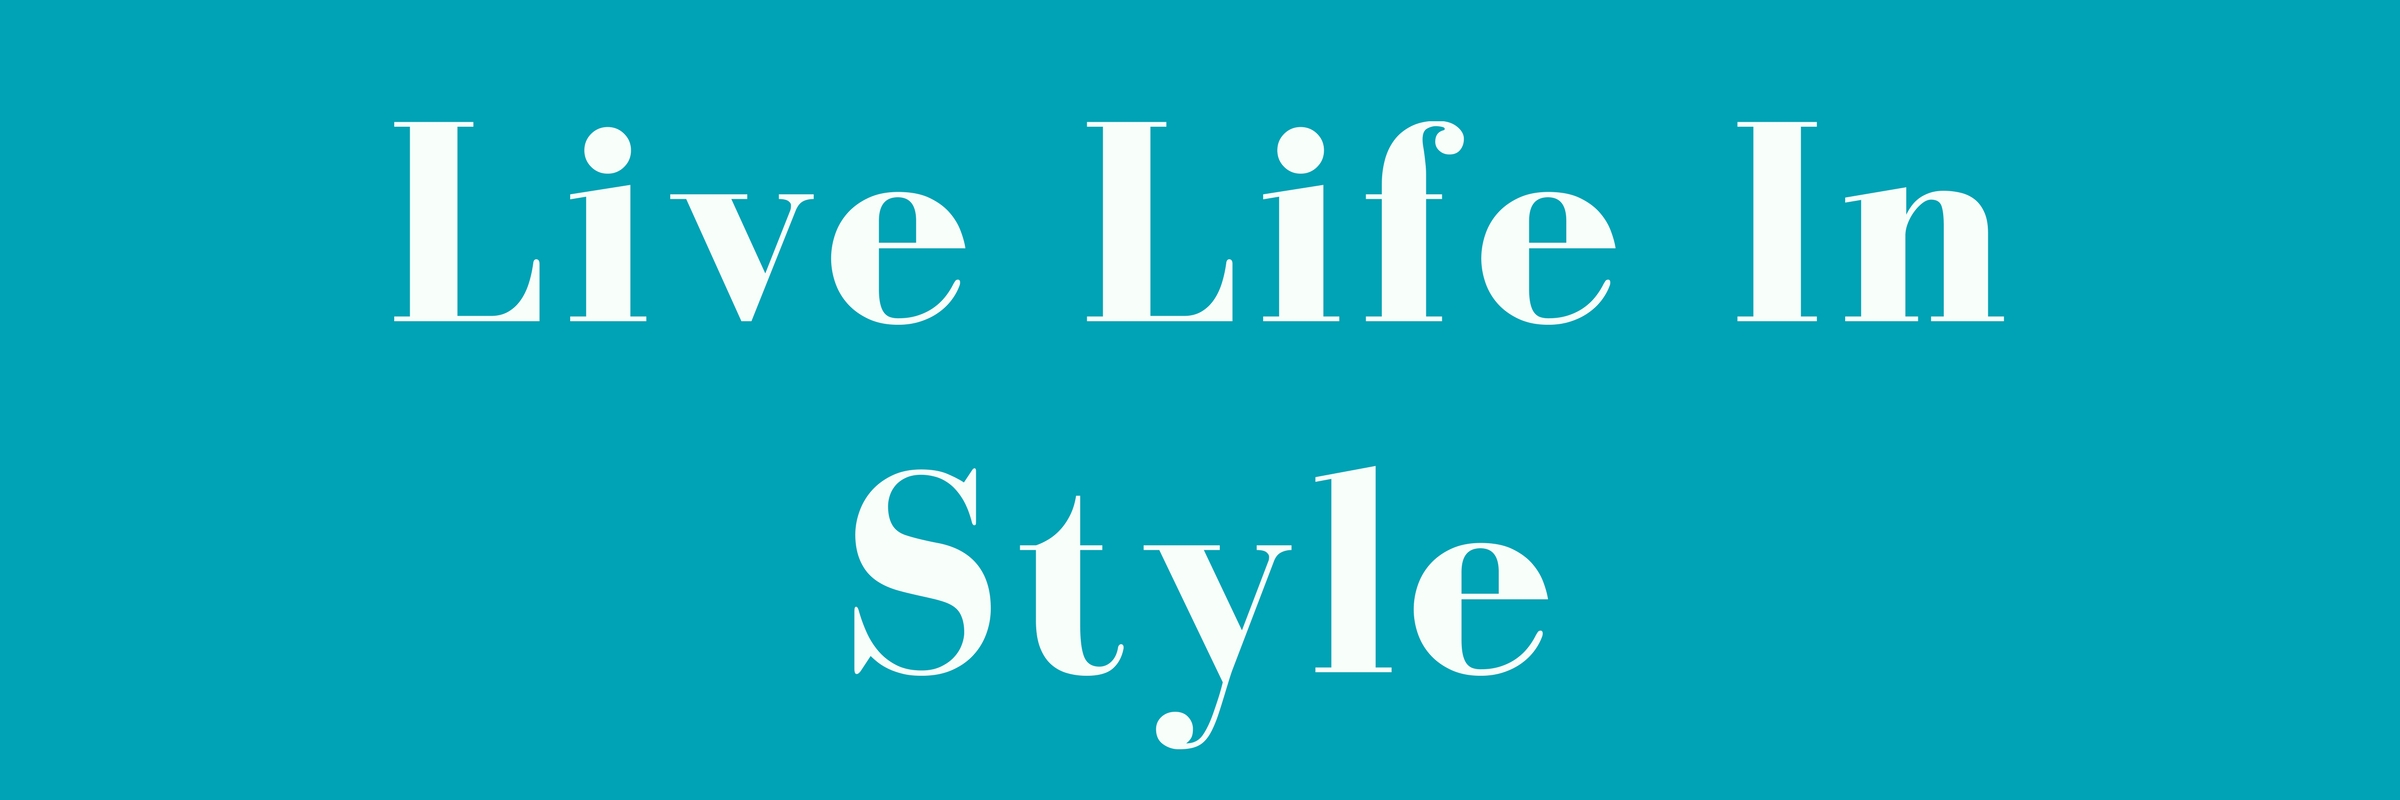 live-life-in-style